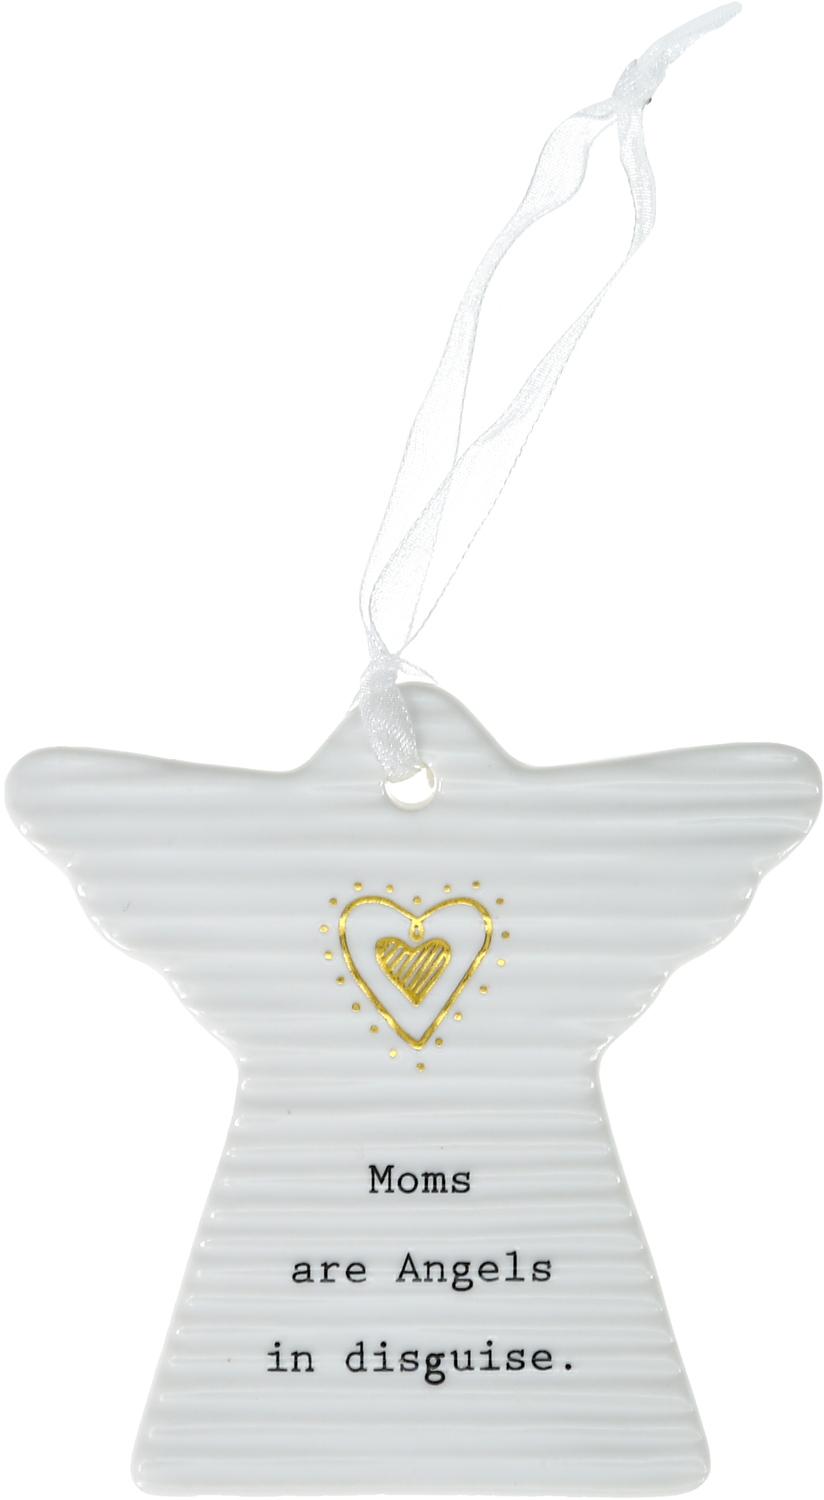 Moms are Angels by Thoughtful Words - Moms are Angels - 3" Hanging Angel Plaque